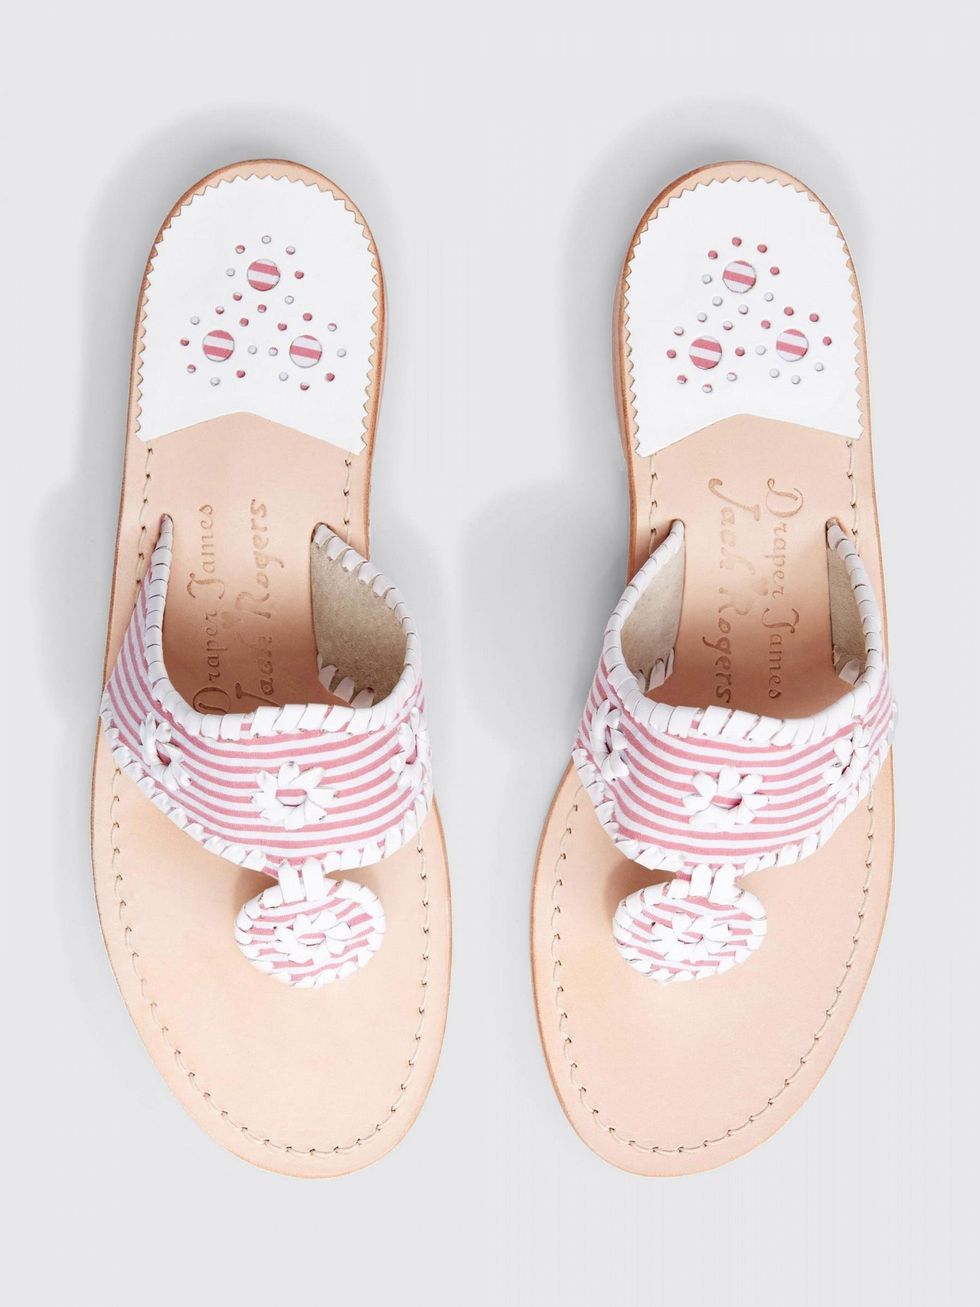 The New Jack Rogers x Draper James Collaboration - Sandals for Sorority ...